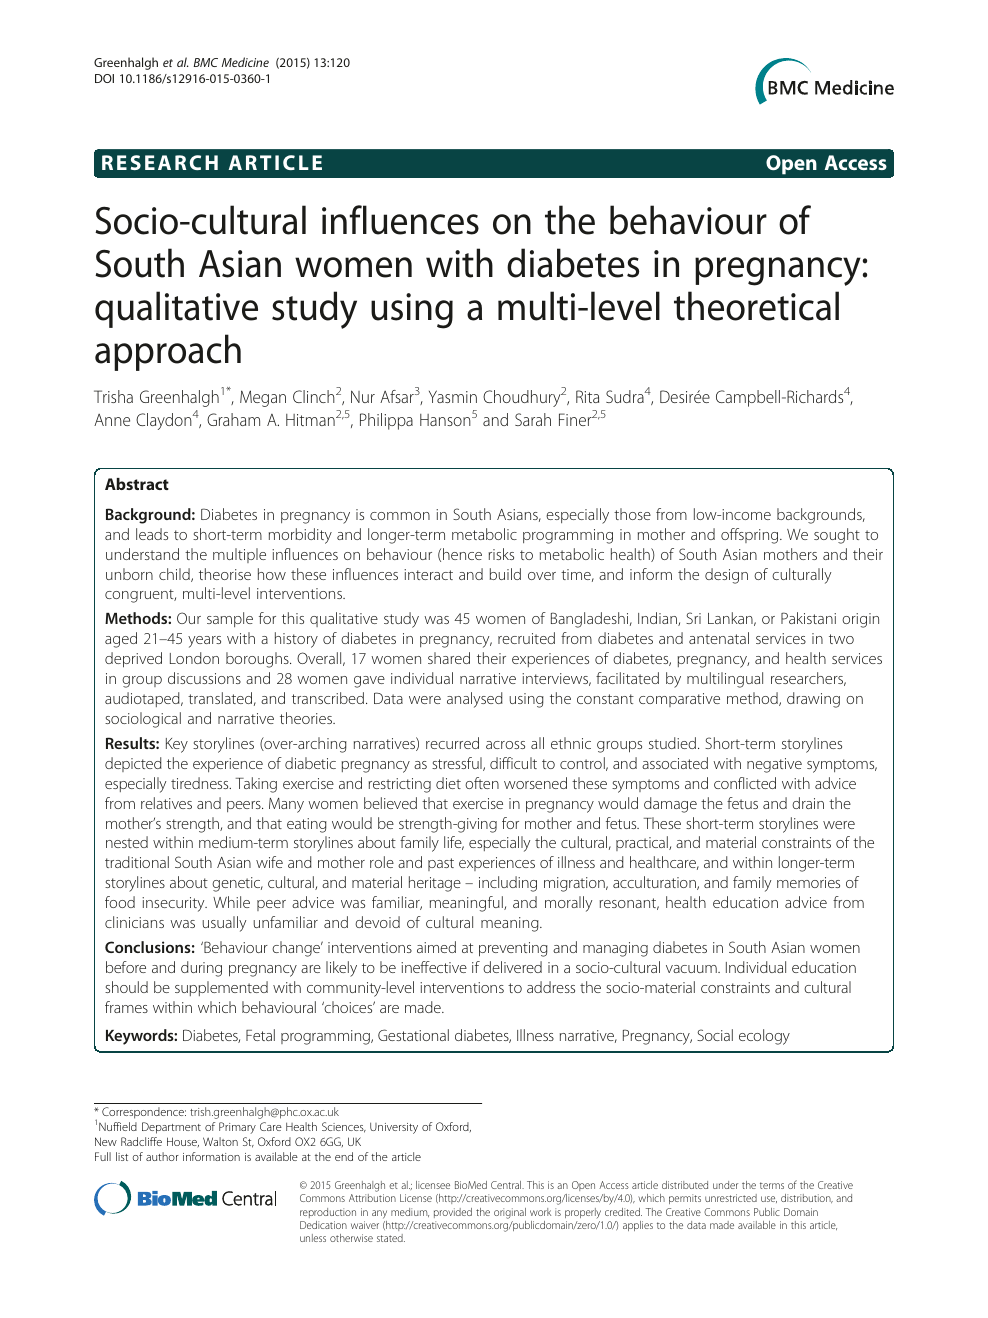 Socio-cultural influences on the behaviour of South Asian women with  diabetes in pregnancy: qualitative study using a multi-level theoretical  approach – topic of research paper in Health sciences. Download scholarly  article PDF